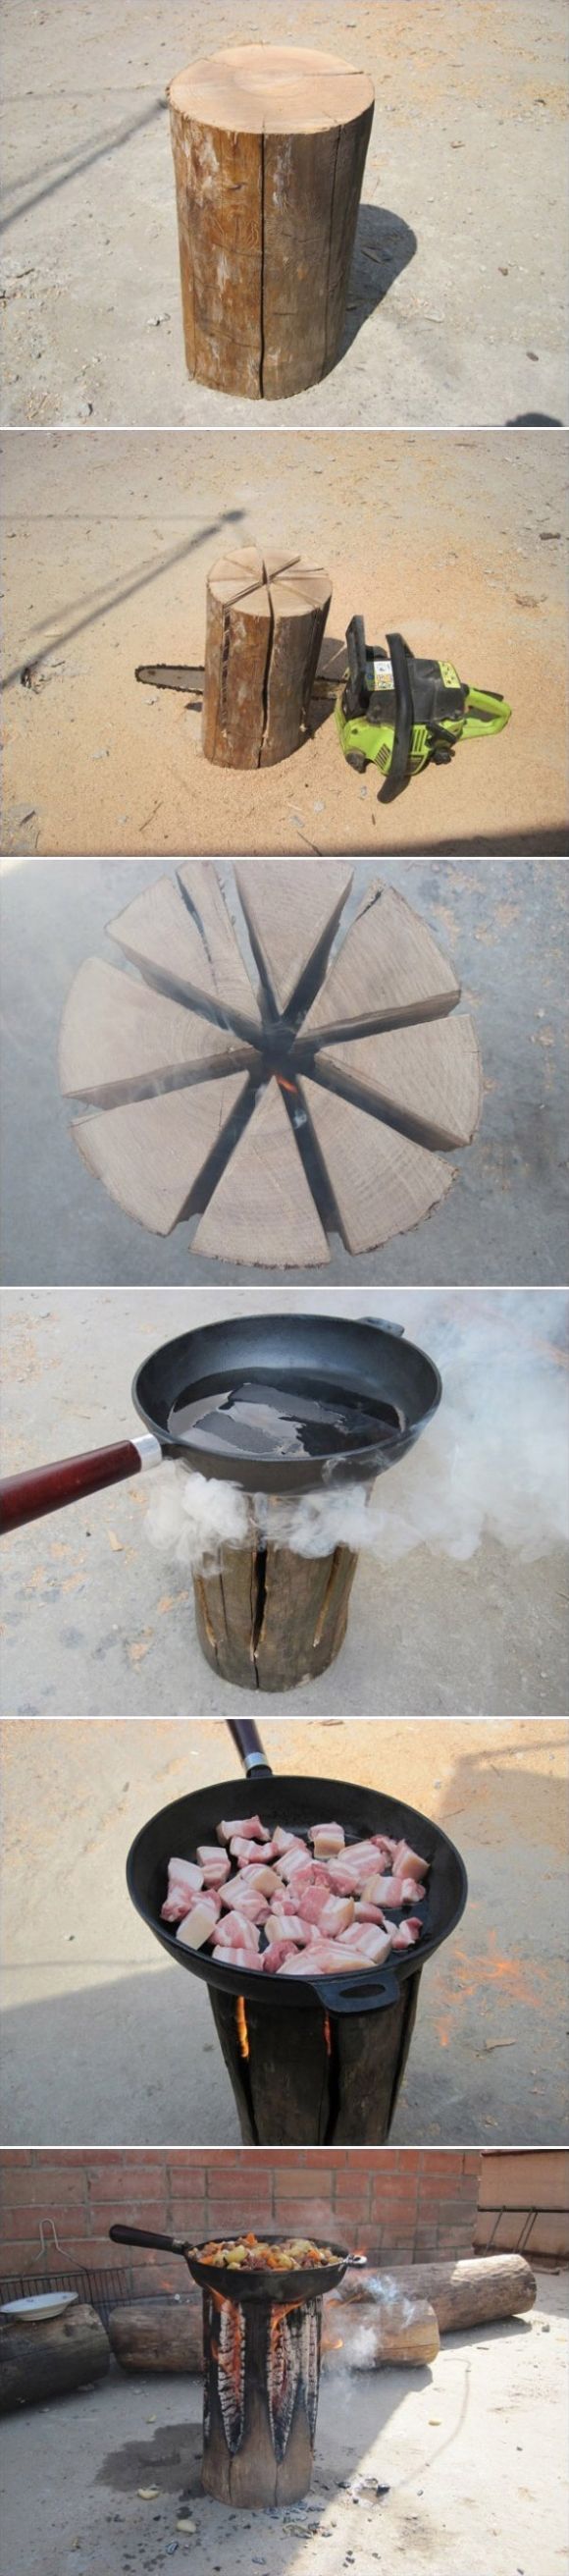 How to cook on a Log Fire     #genius #survival #camping #diy #homestead #farmli